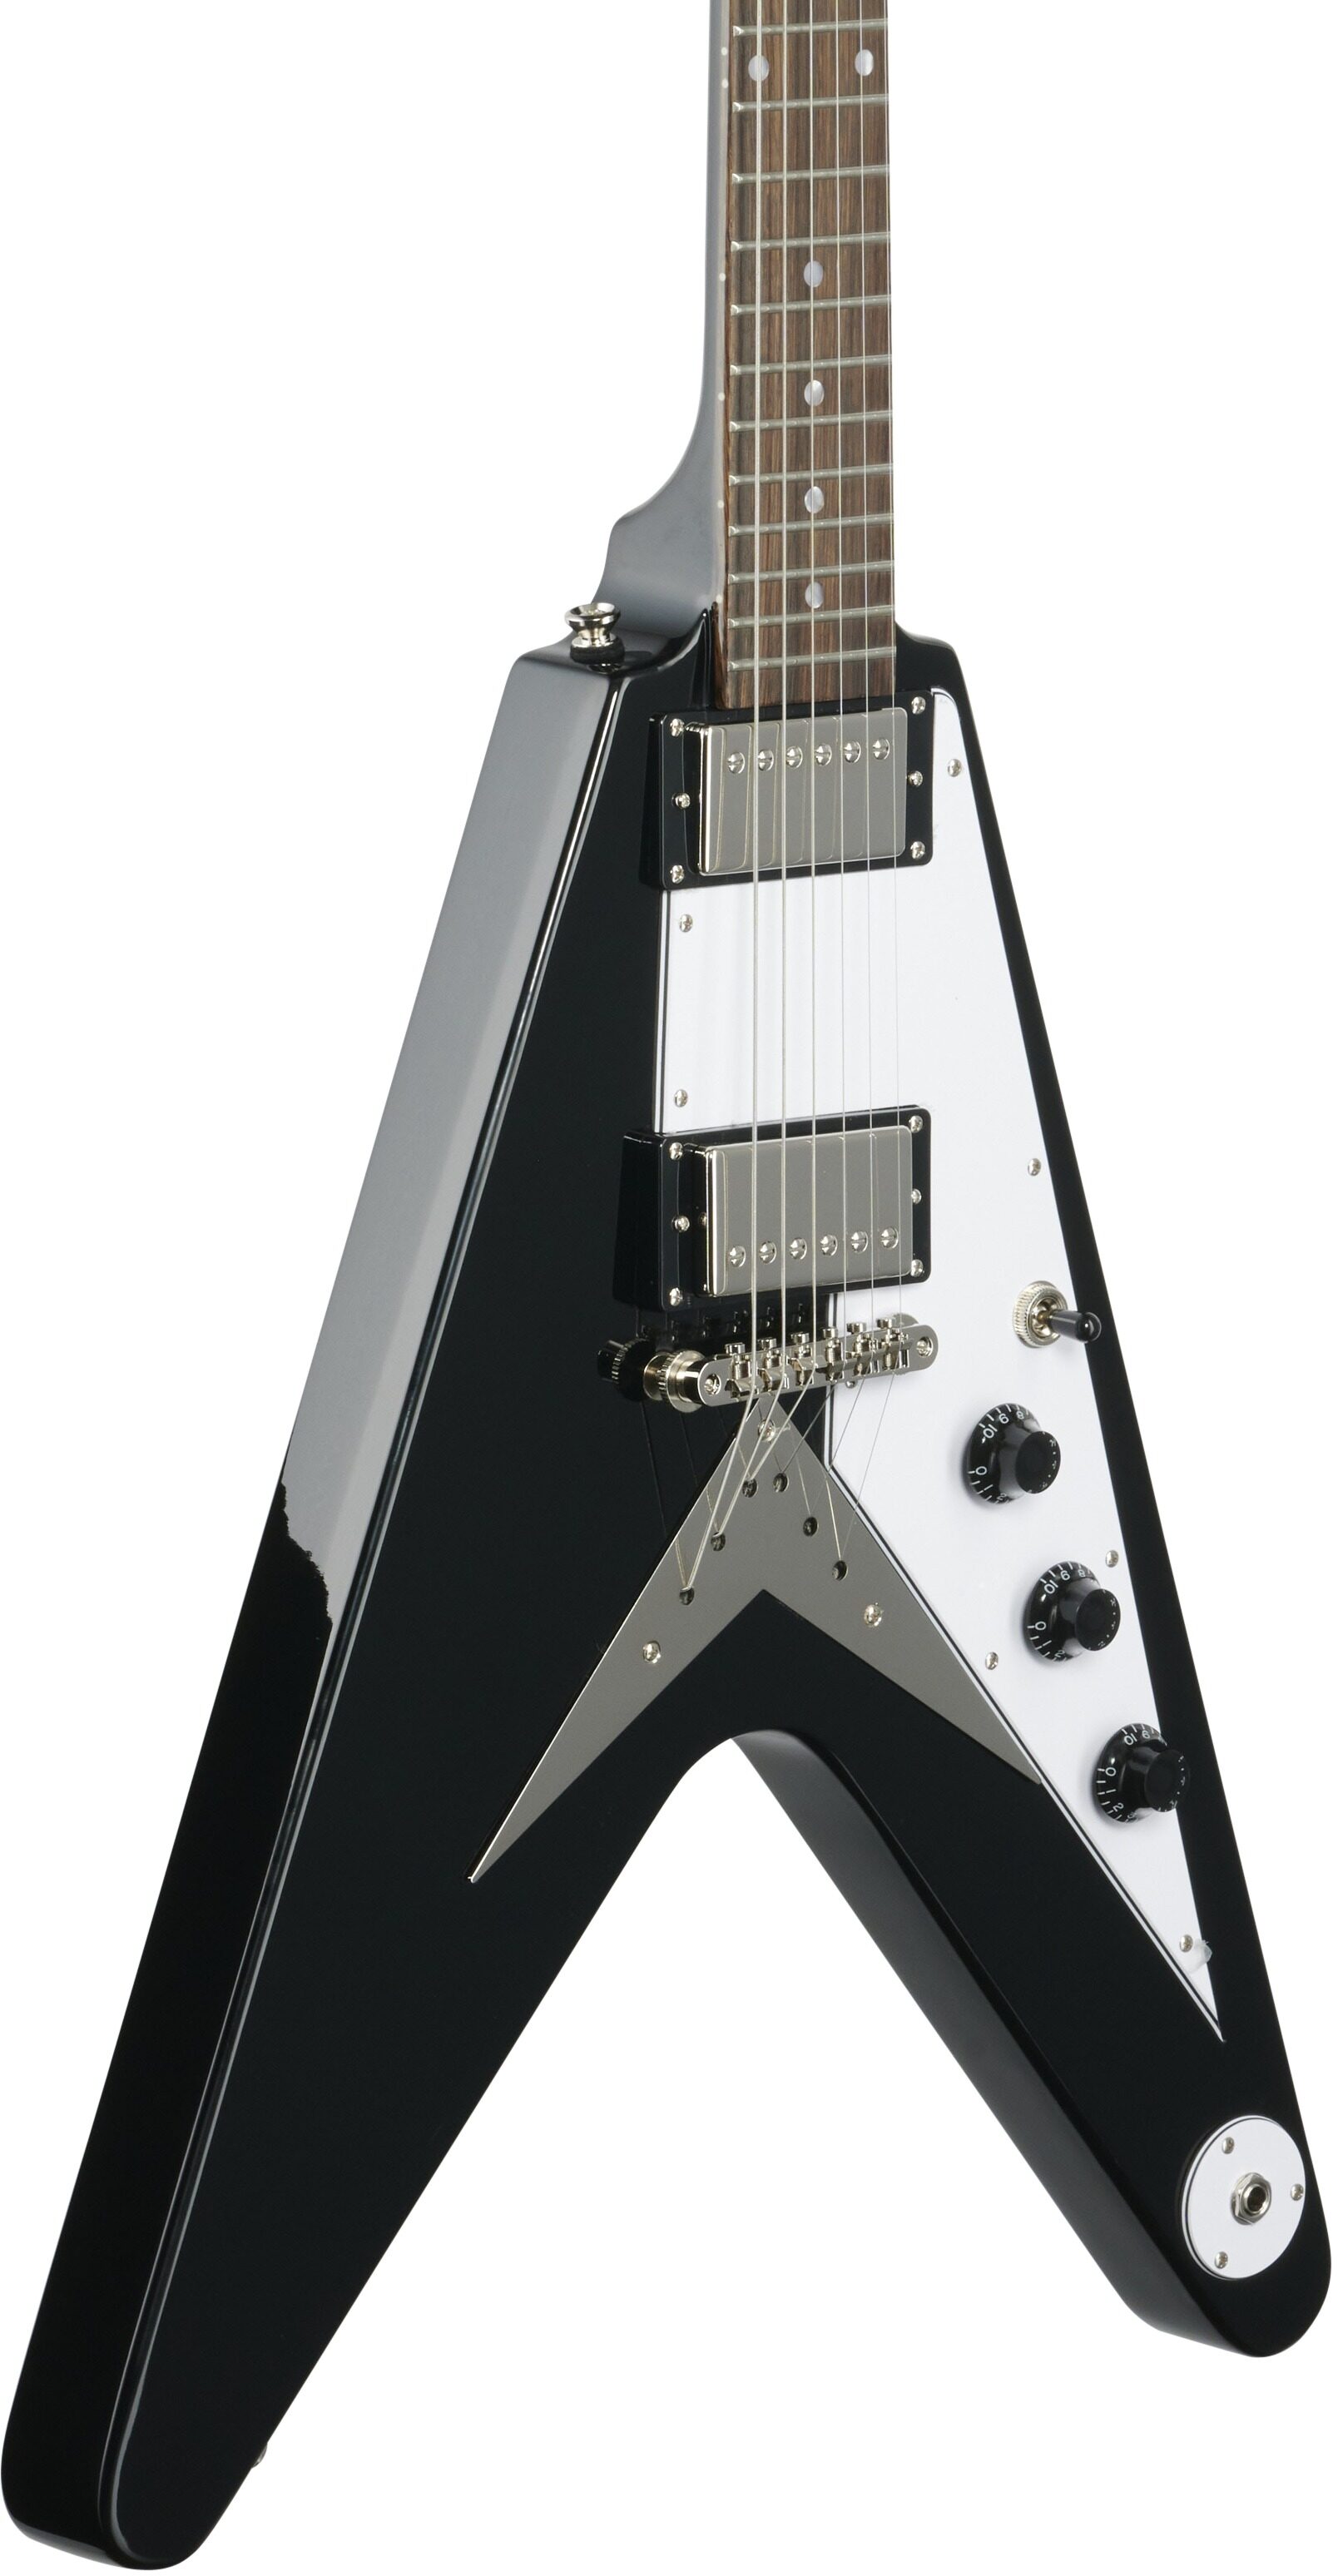 Epiphone Flying V Electric Guitar   zZounds